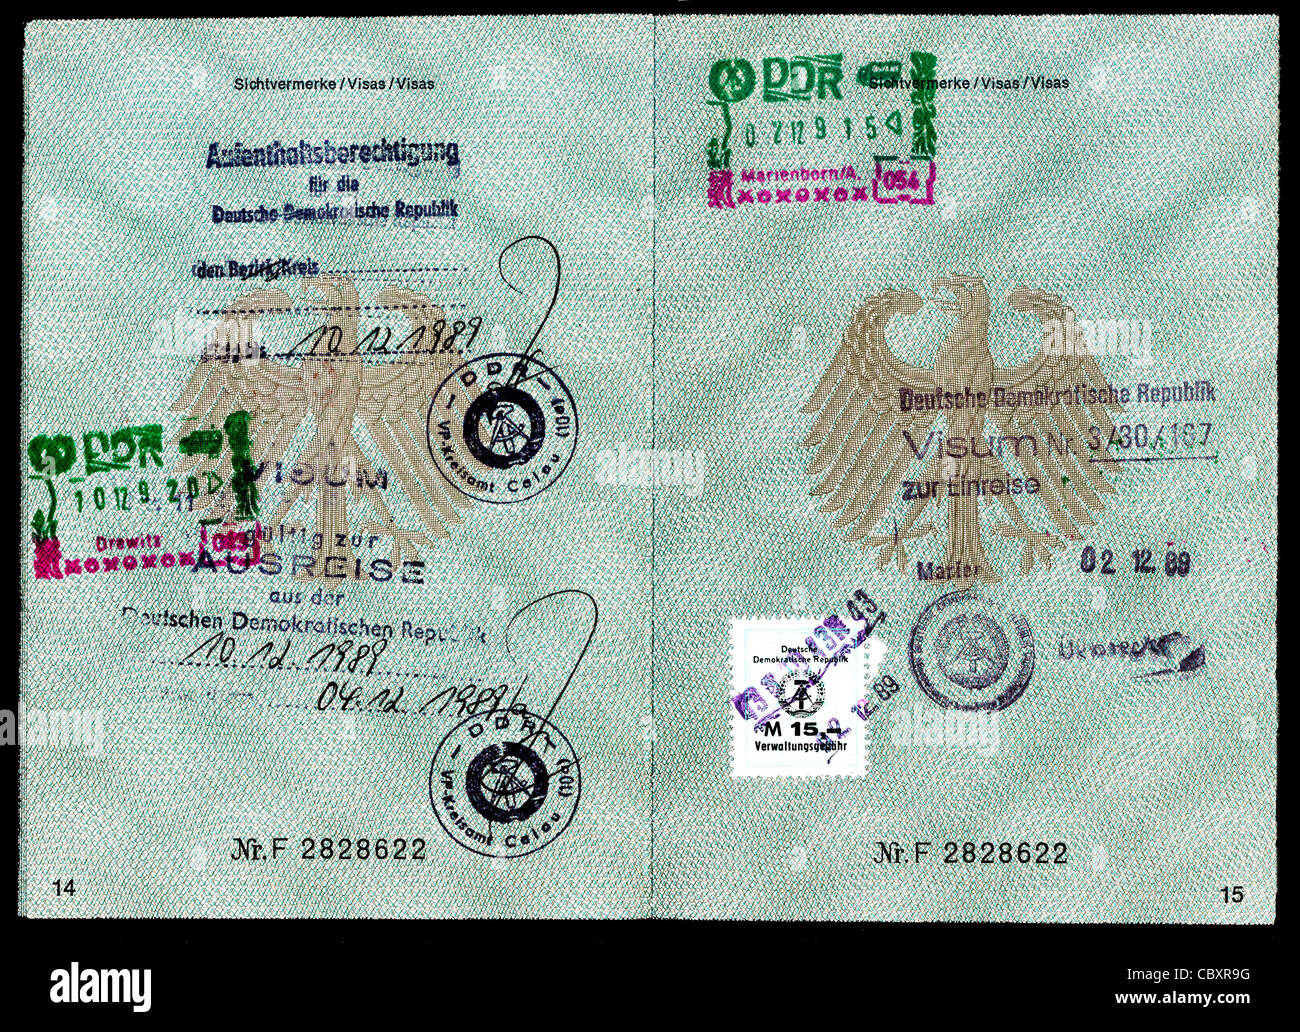 Passport of the Federal Republic of Germany with the remark of a right of residence in the GDR and the visas of the police. Stock Photo